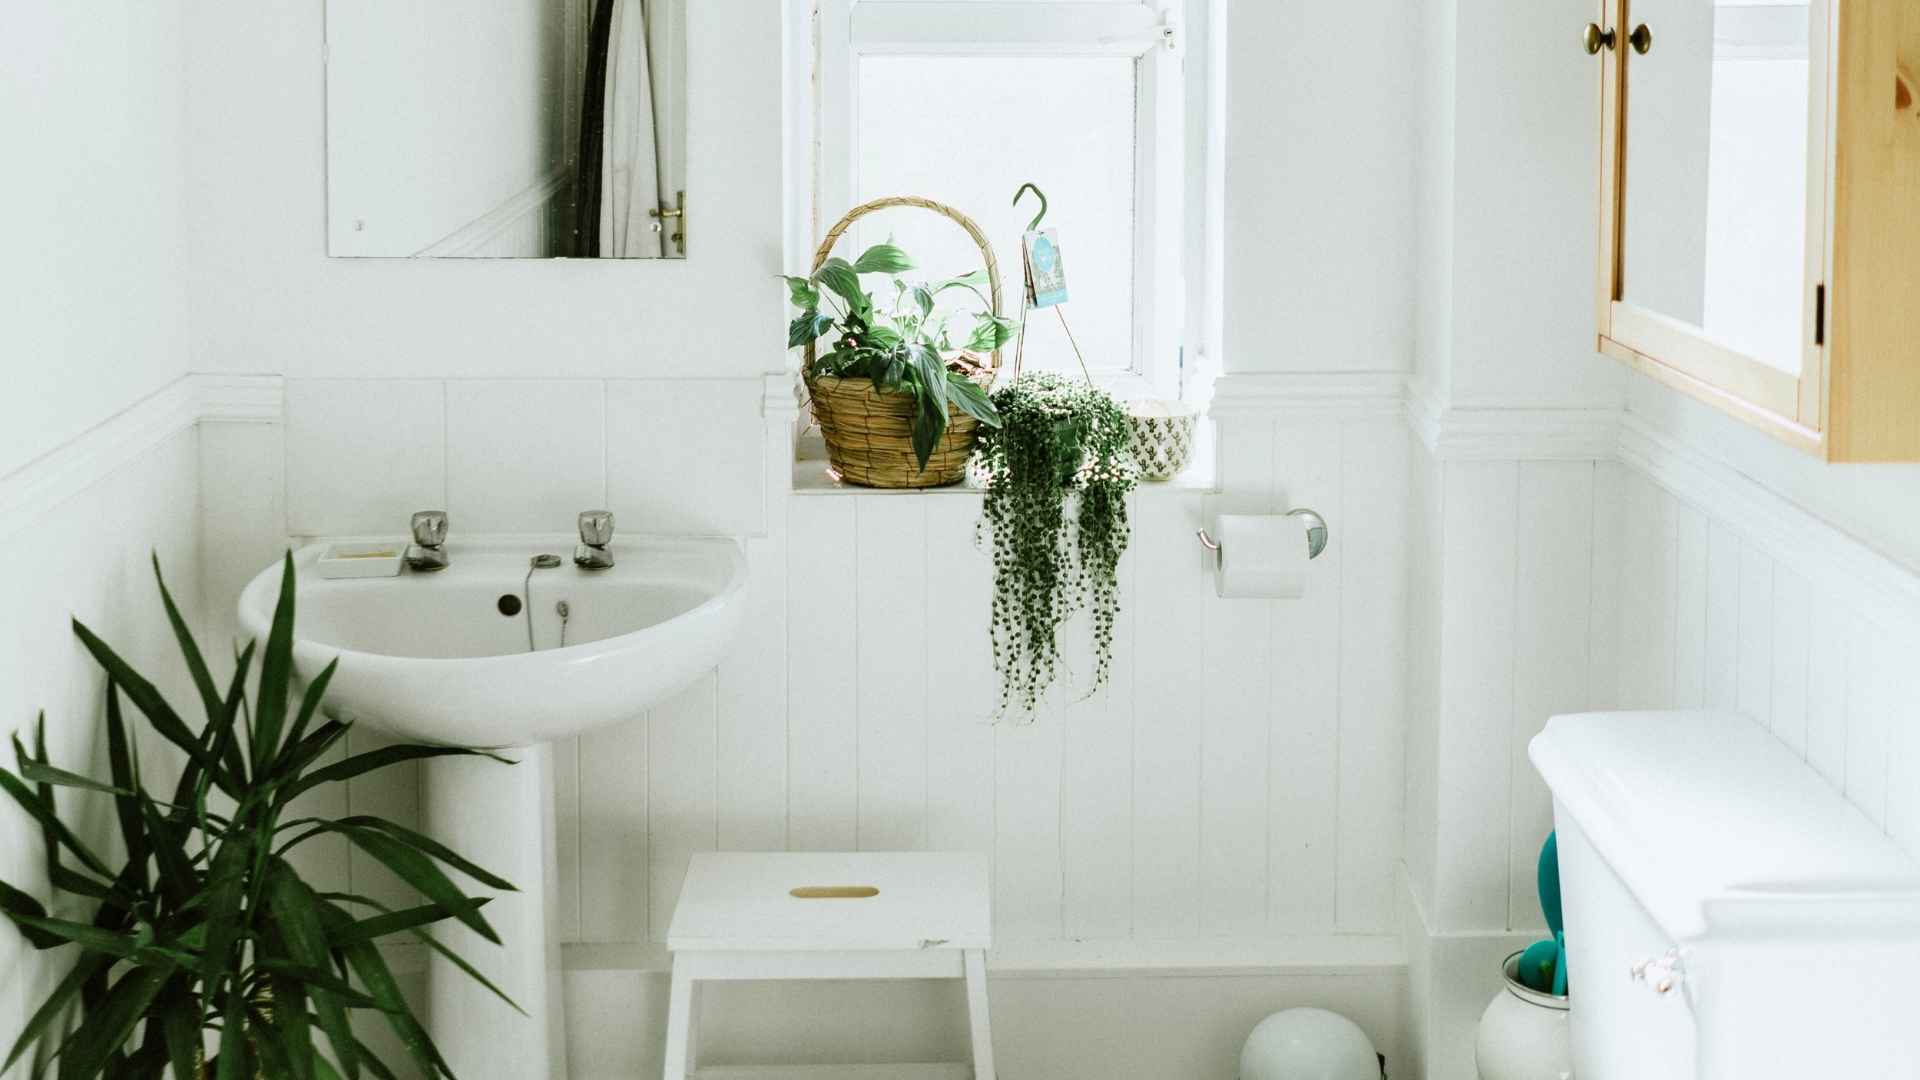 7 Bathroom Mold Prevention Ideas to Keep Your Home Safe